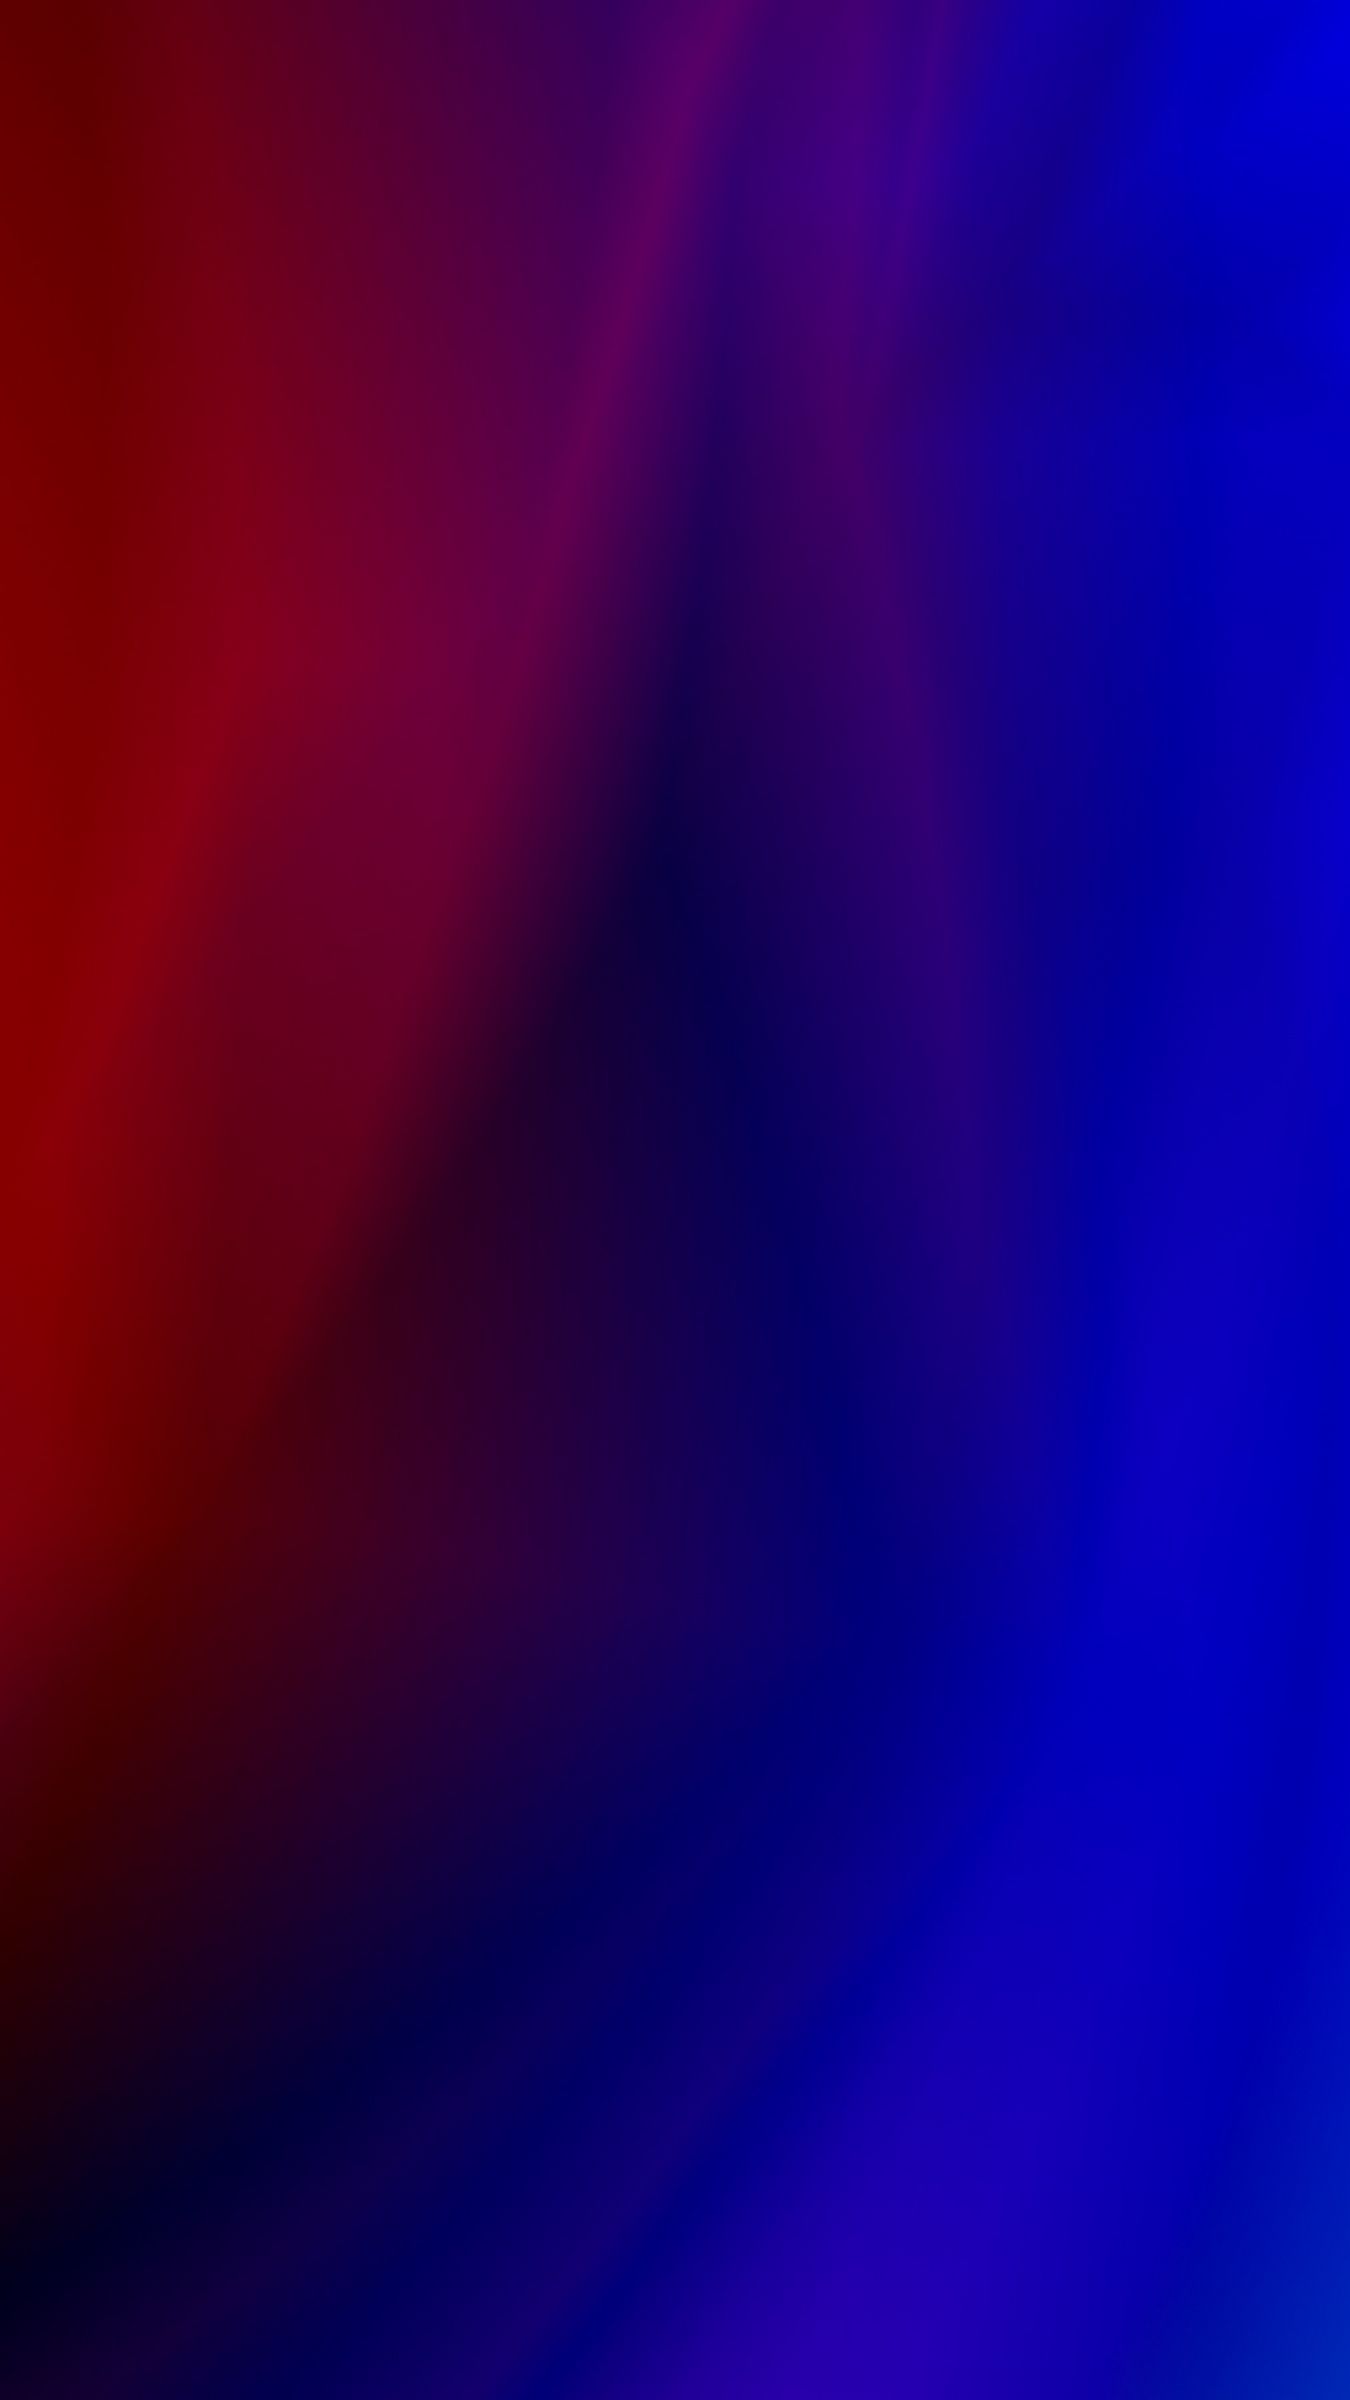 Pretty Gradient Background For IPhone 15 Pro